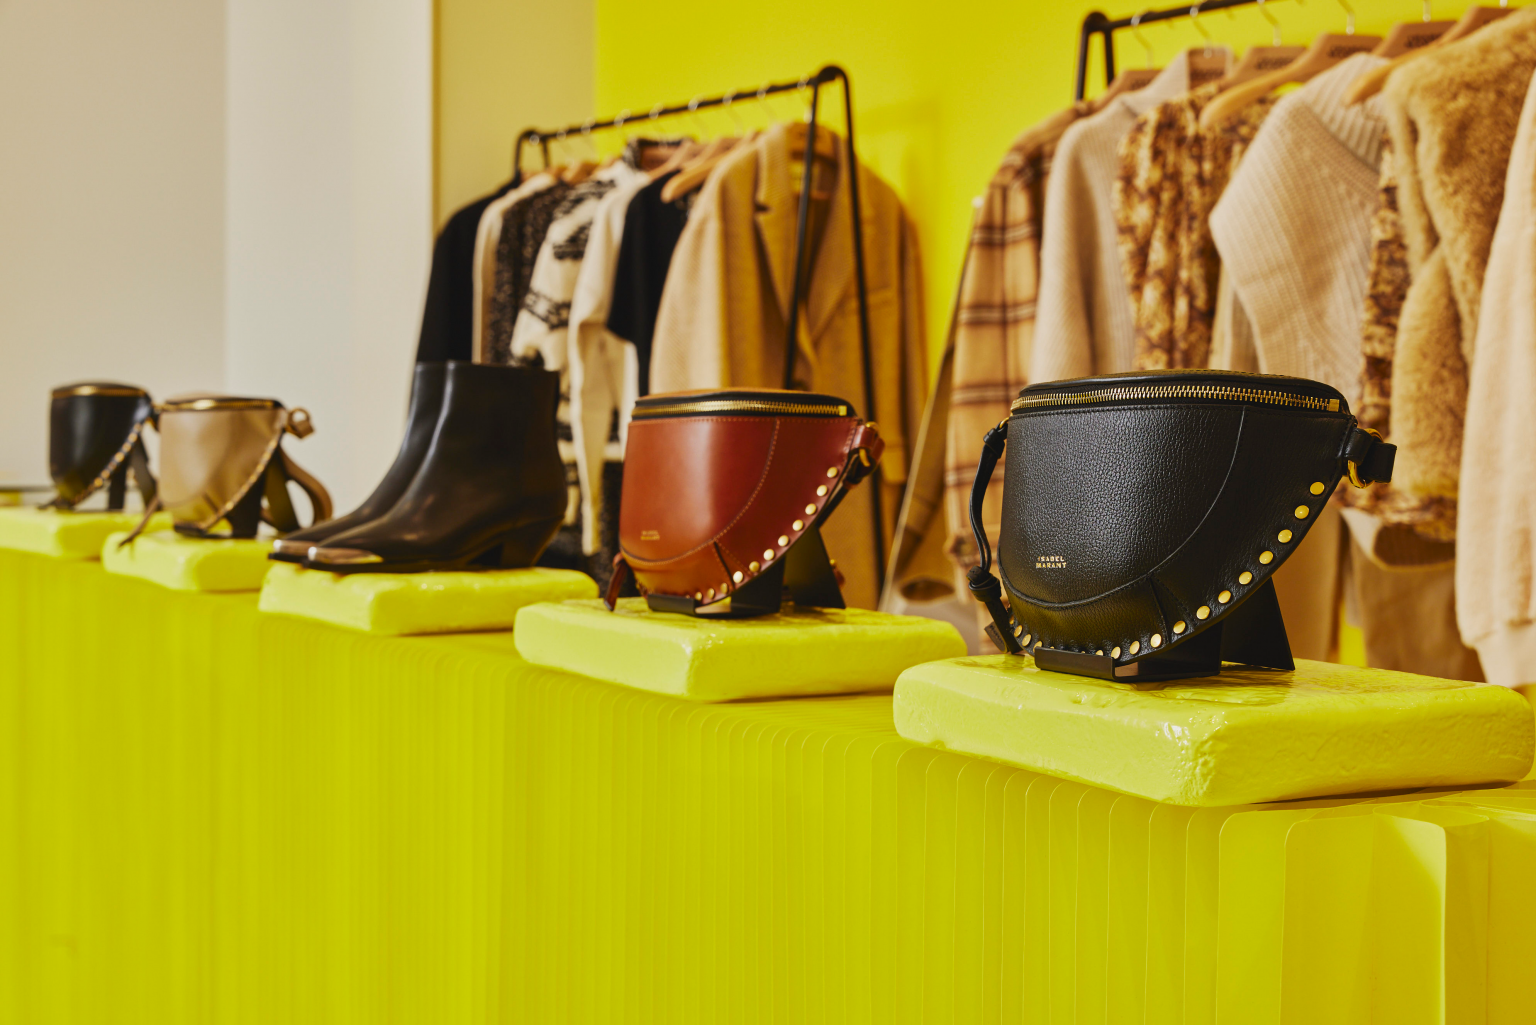 Close-up image of yellow display stands featuring various pieces from the Isabel Marant clothing collection, including handbags and boots, with clothing visible in background.